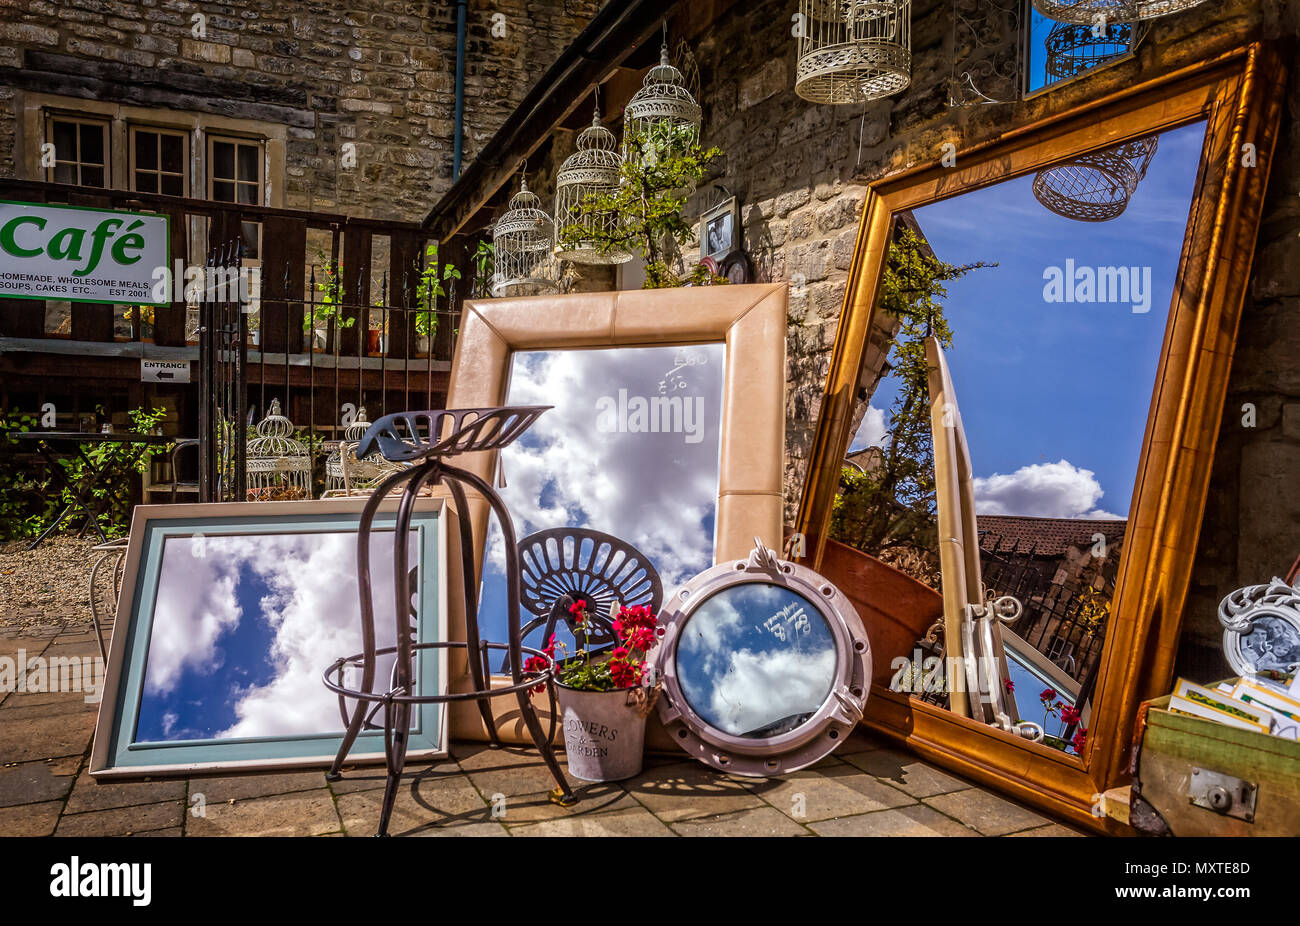 Sky reflected in a collection of framed mirrors taken ion Bradford on Avon, Wiltshire, UK on 25 July 2015 Stock Photo